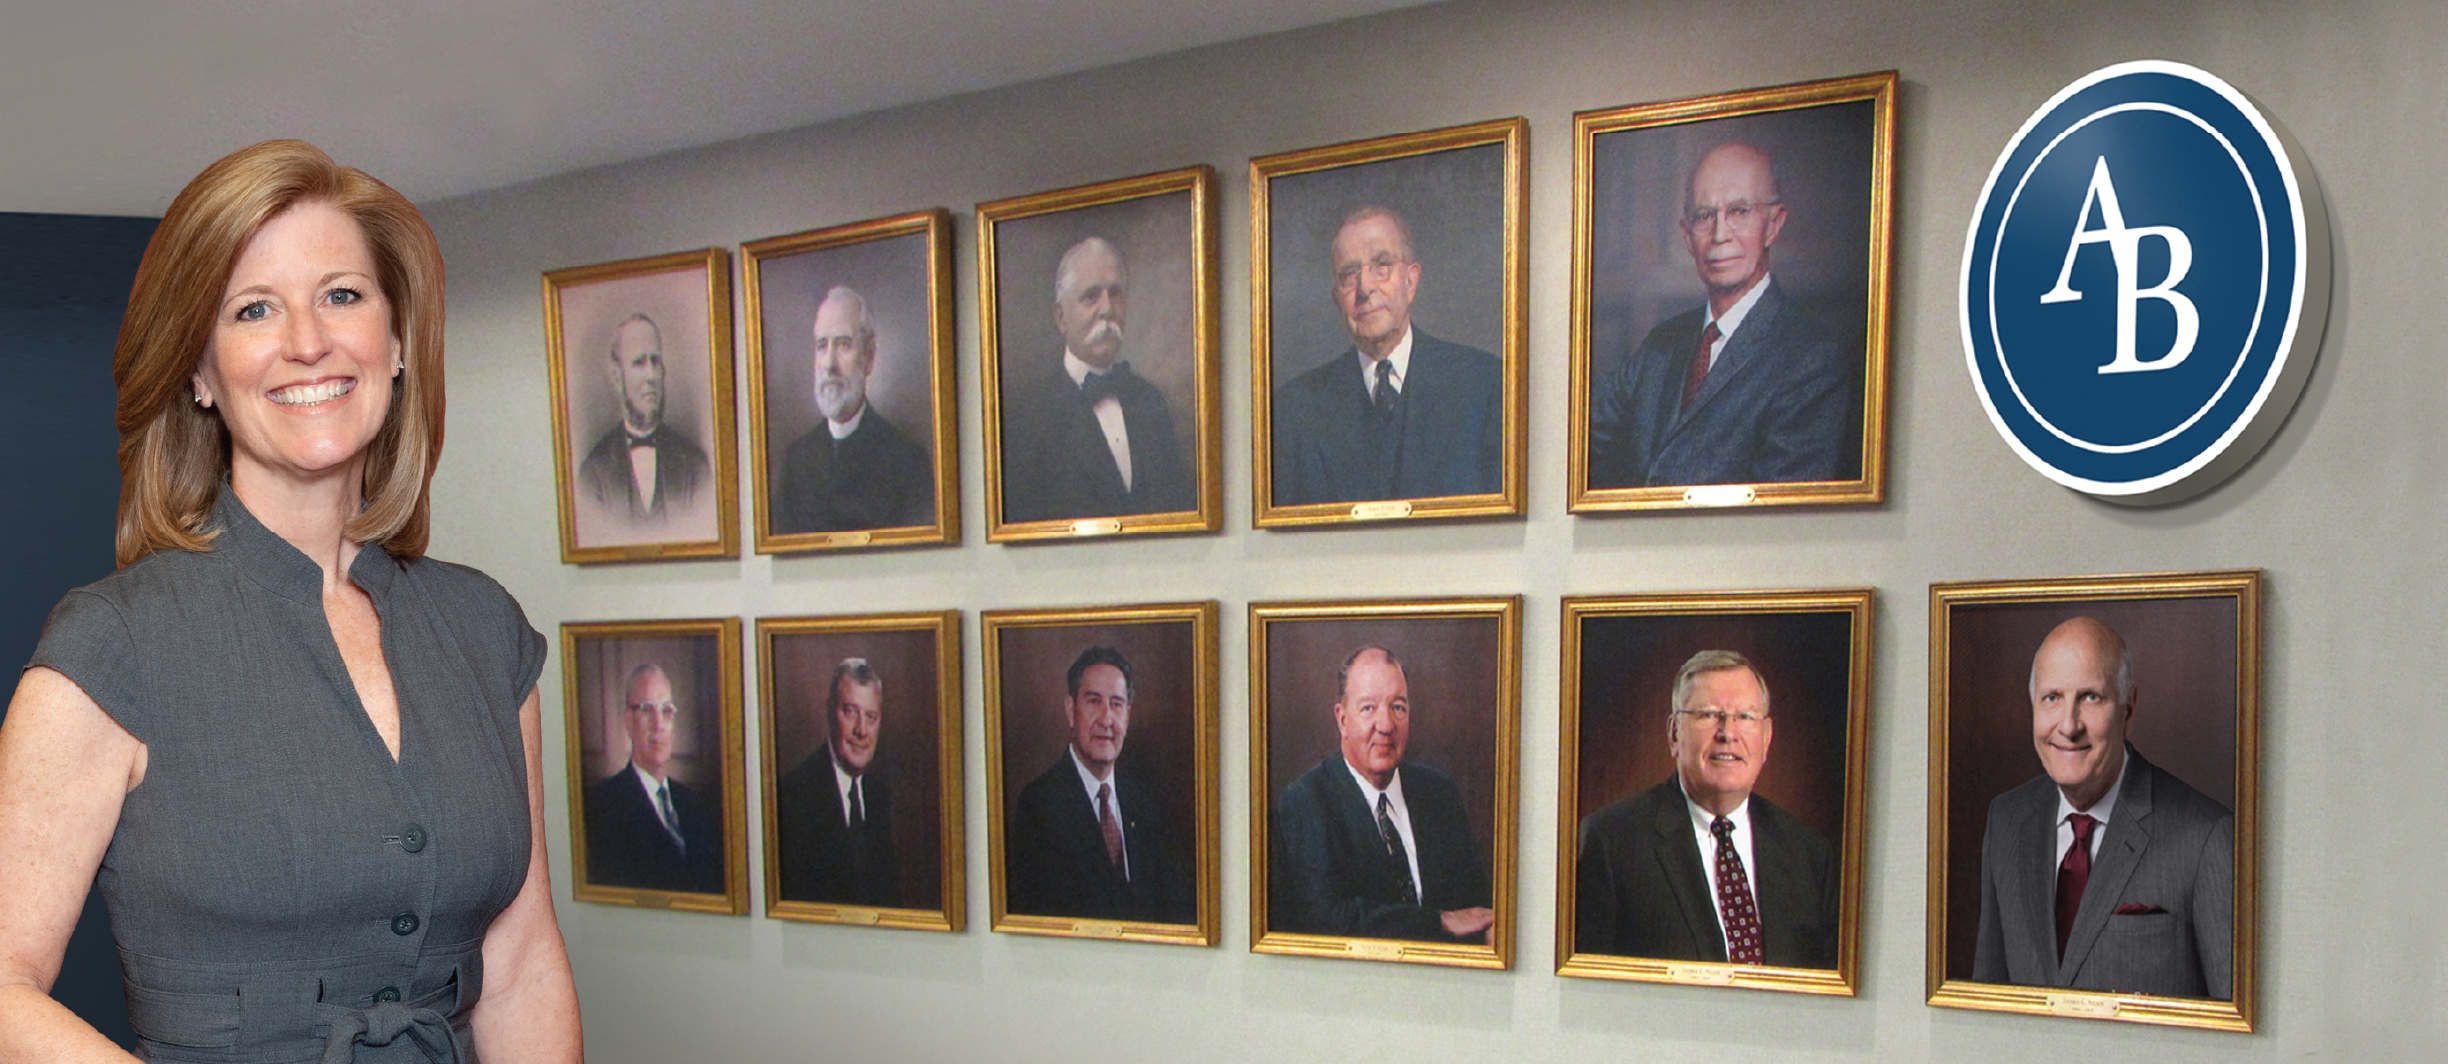 President in front of past president photo wall